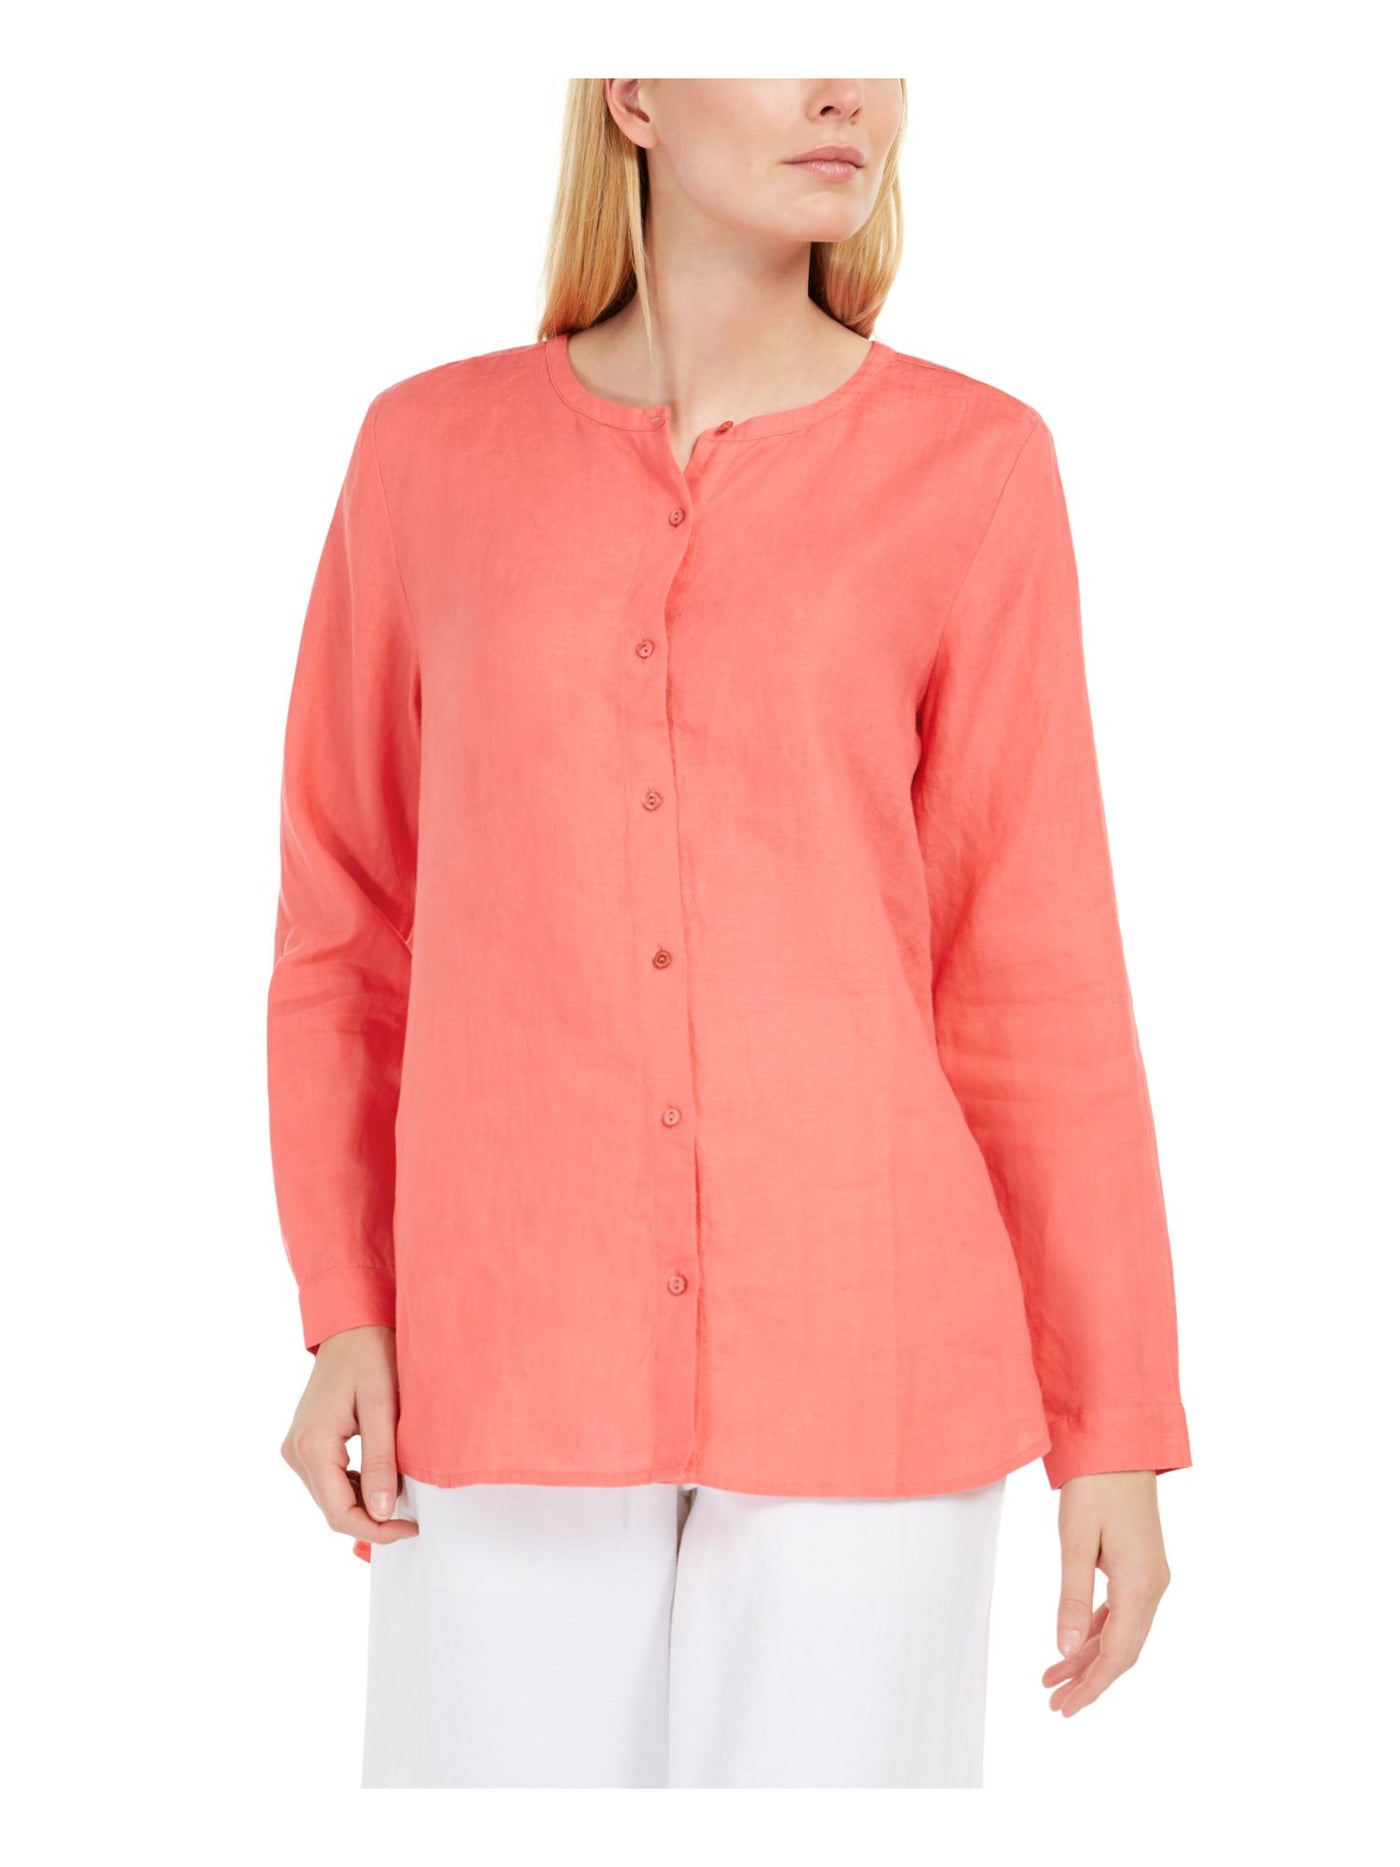 EILEEN FISHER Womens Coral Long Sleeve Jewel Neck Button Up Top XL